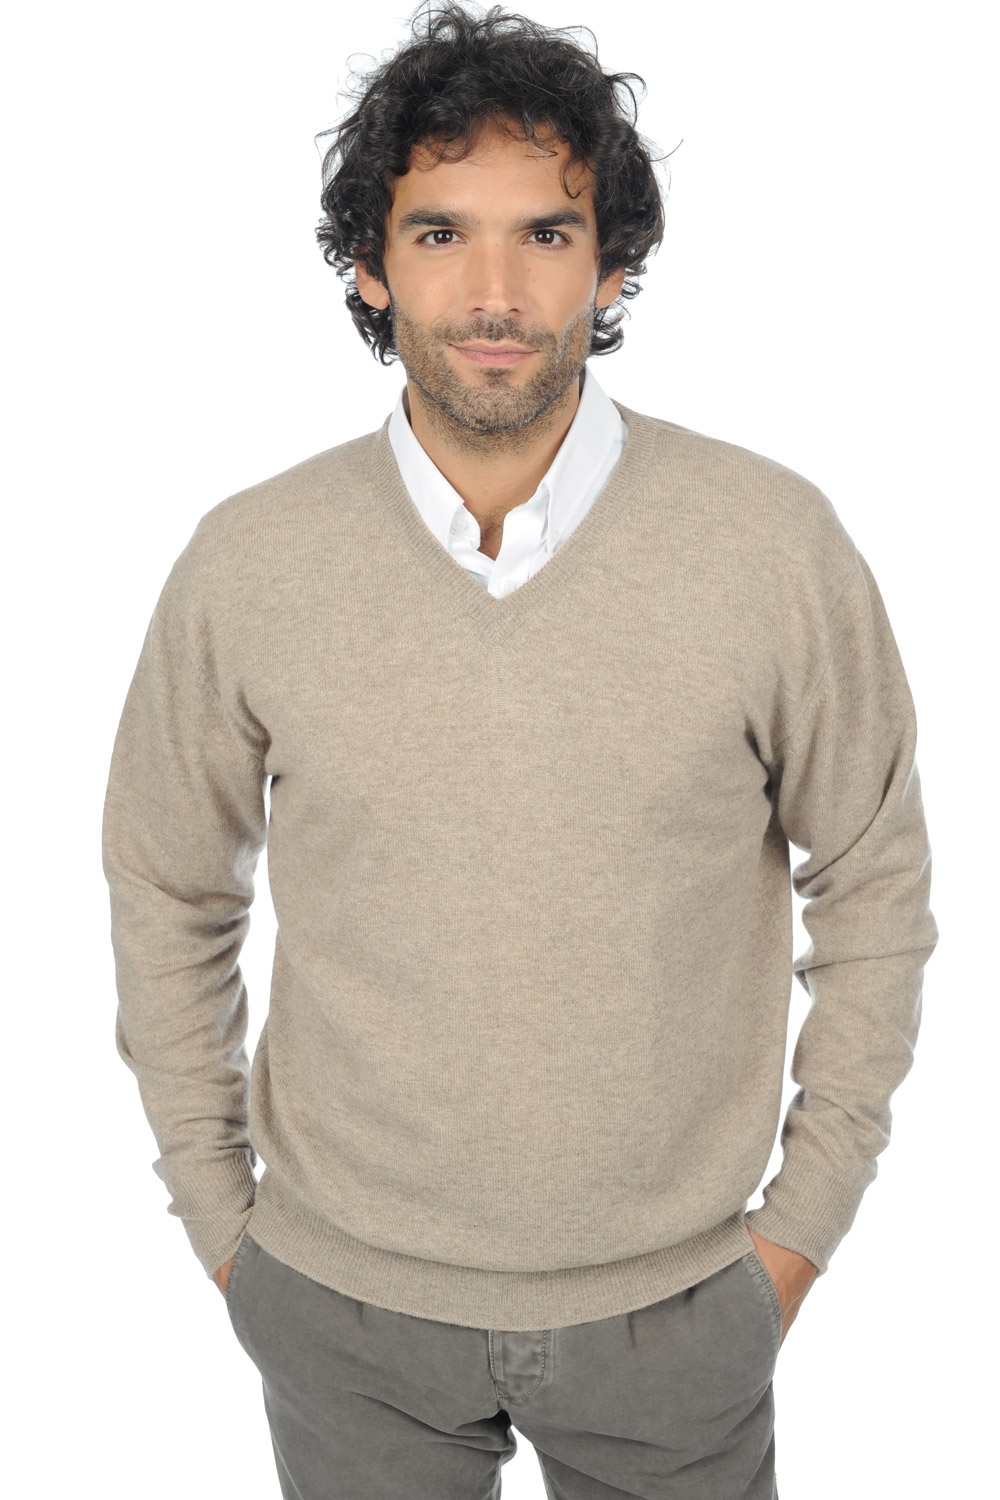 Cashmere men timeless classics hippolyte natural brown s